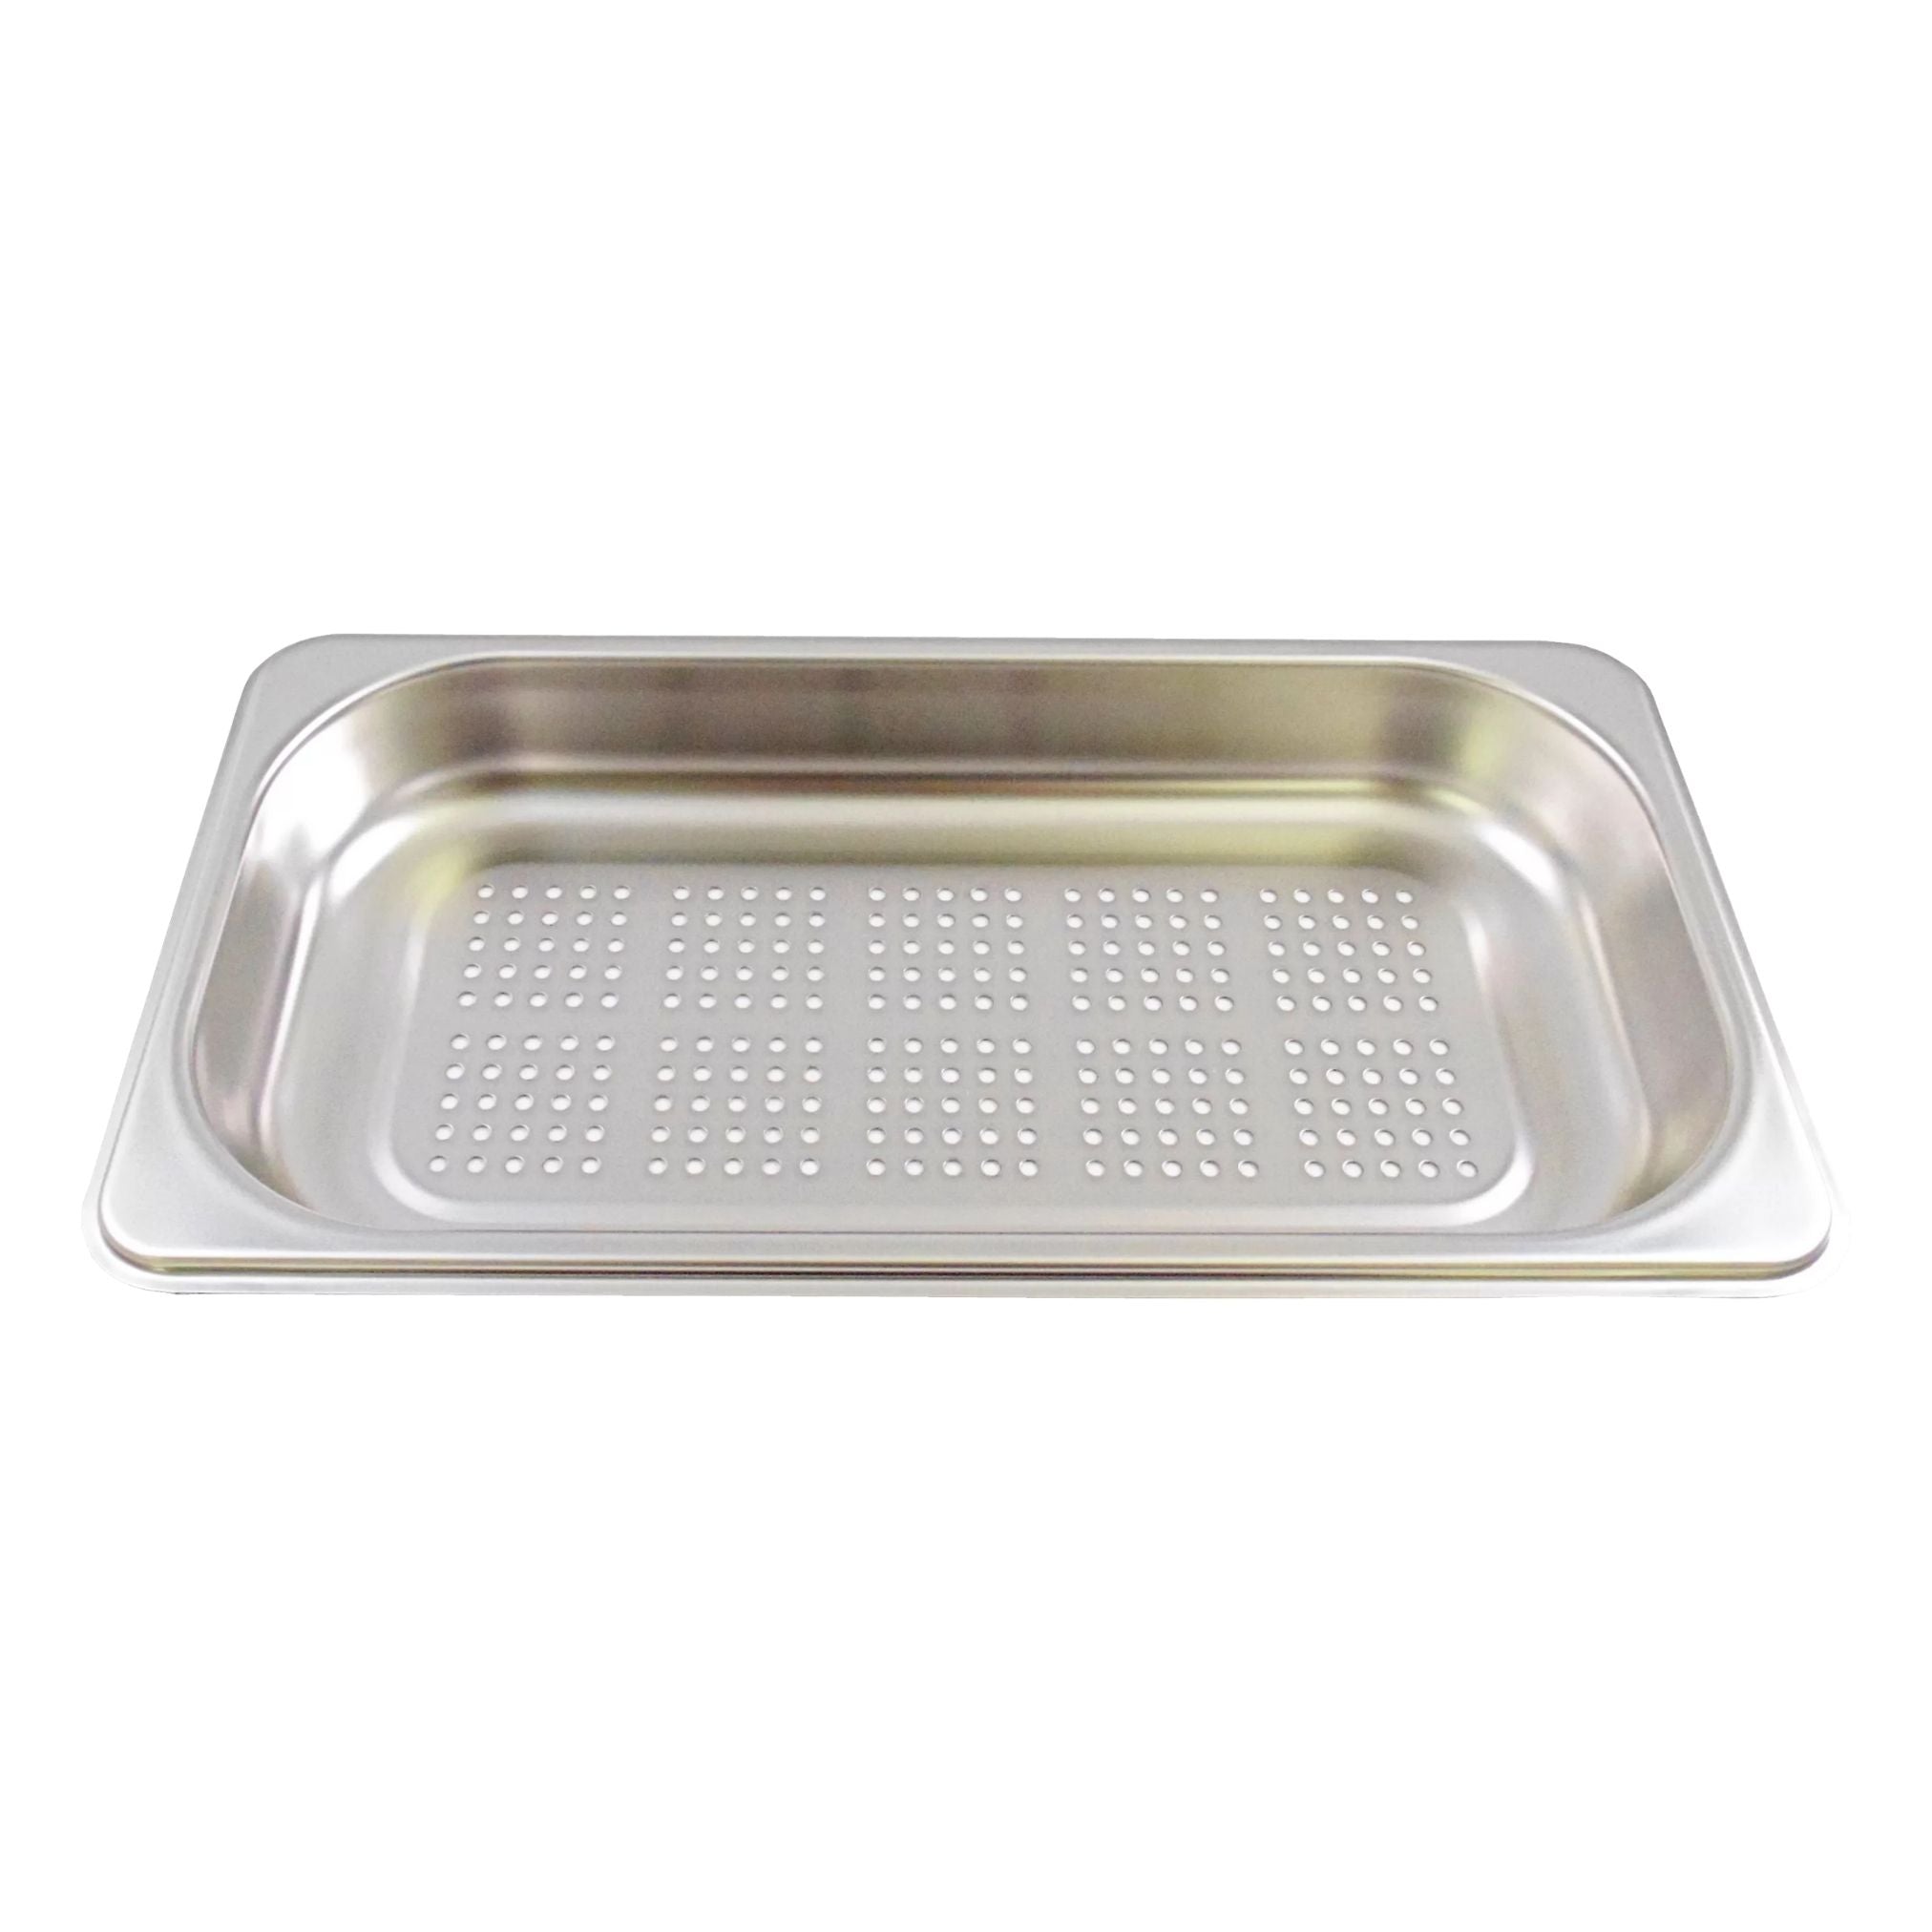 00741839 Unperforated Steam Oven Baking Tray (Large)